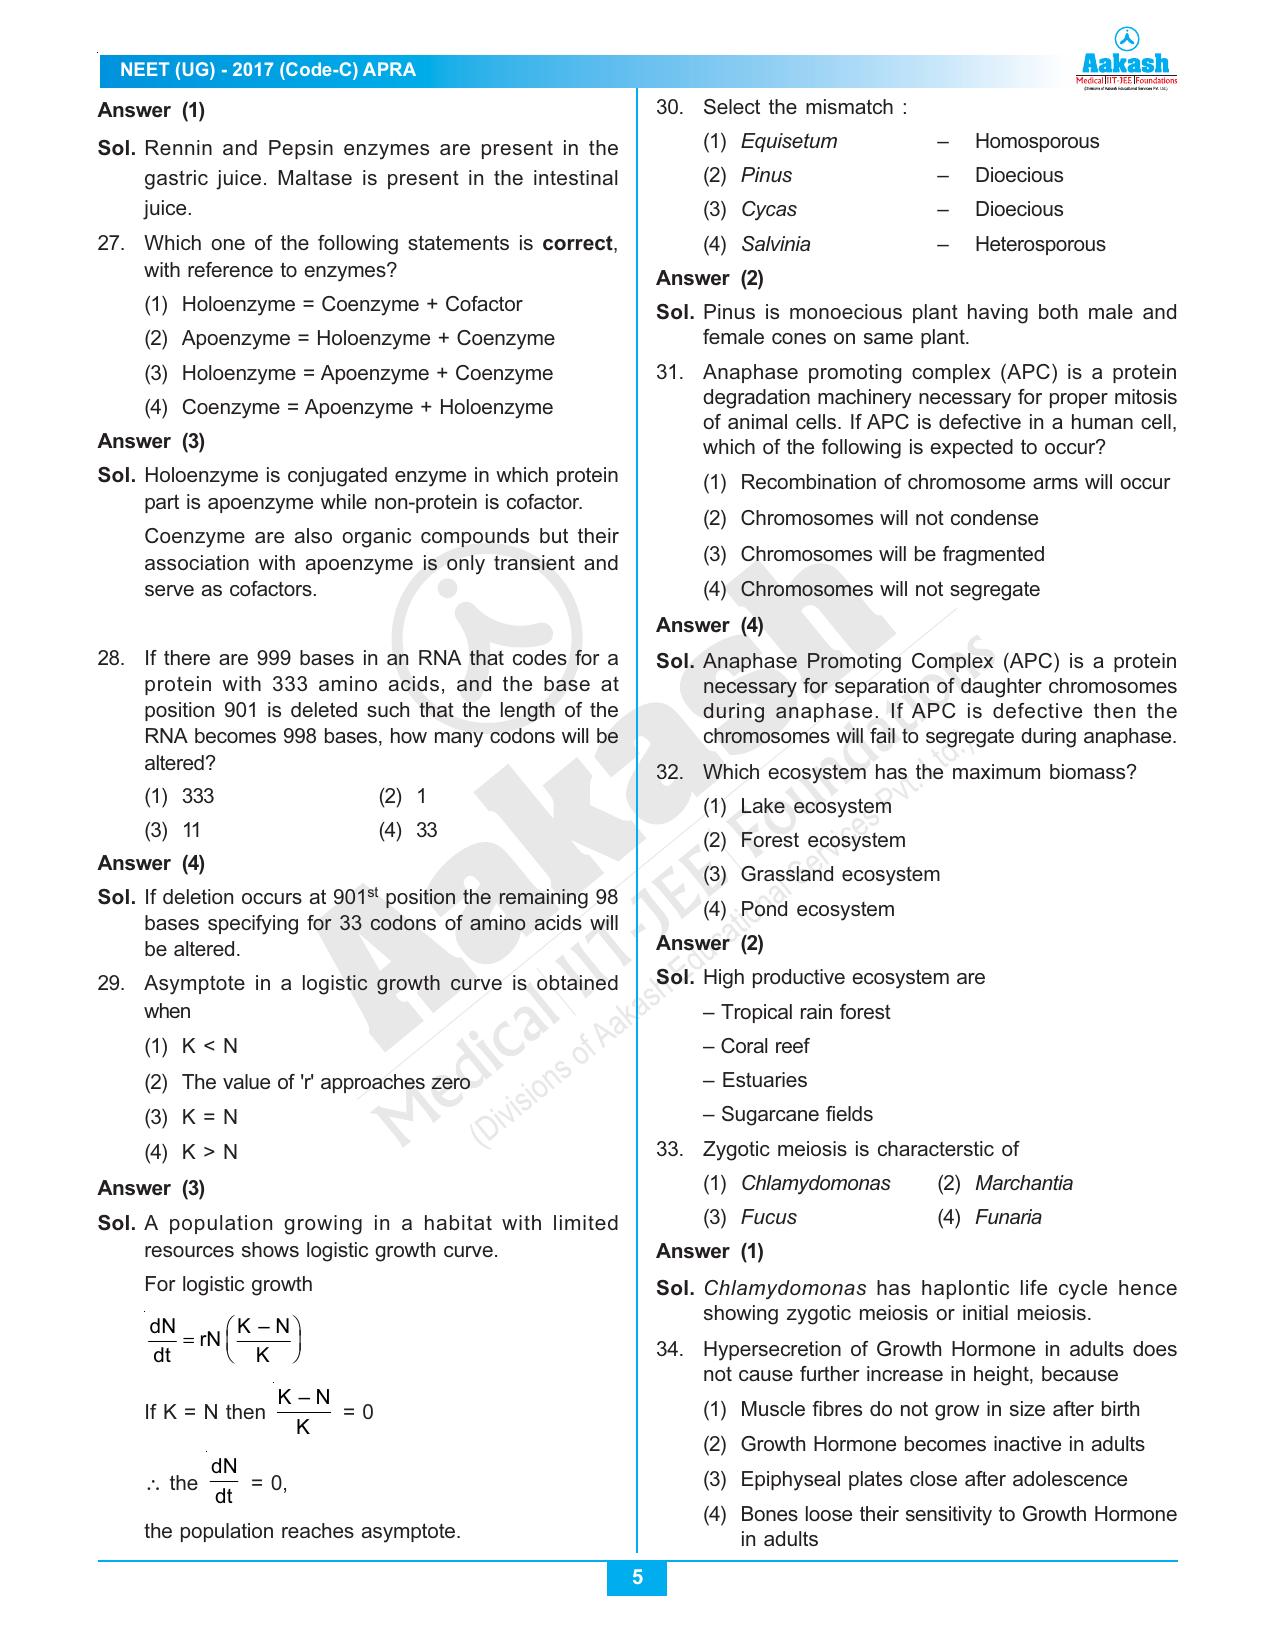  NEET Code C 2017 Answer & Solutions - Page 5